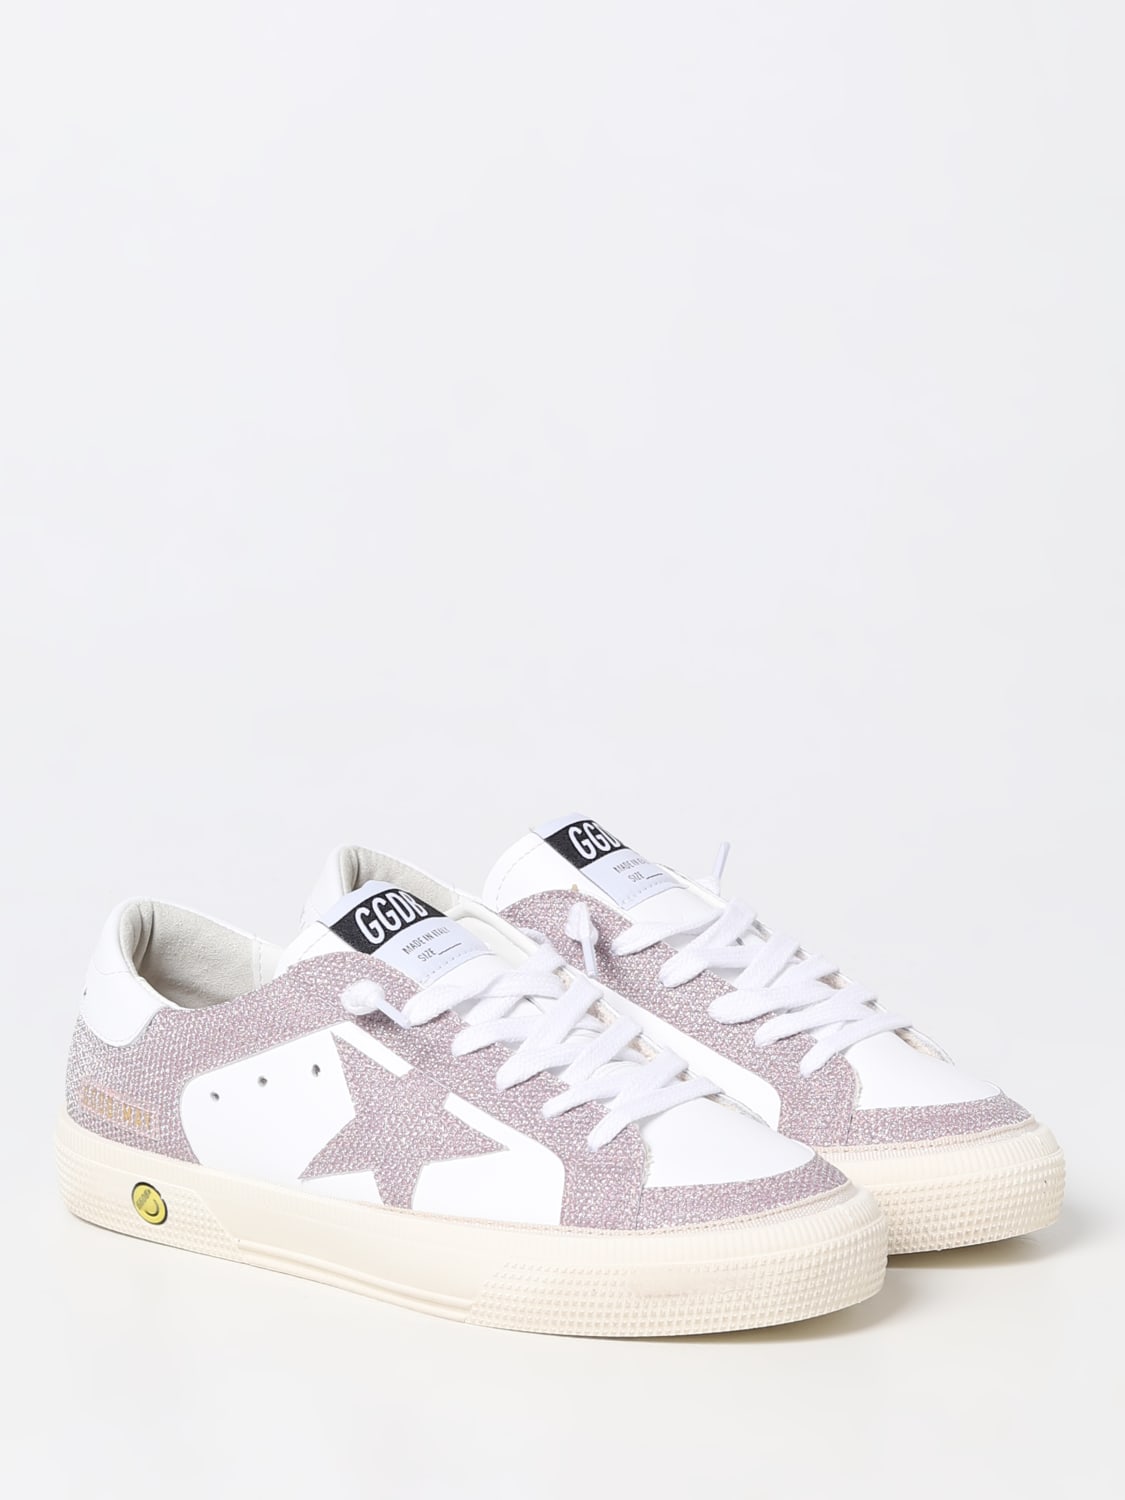 GOLDEN GOOSE: May sneakers in leather and glittery fabric - White ...